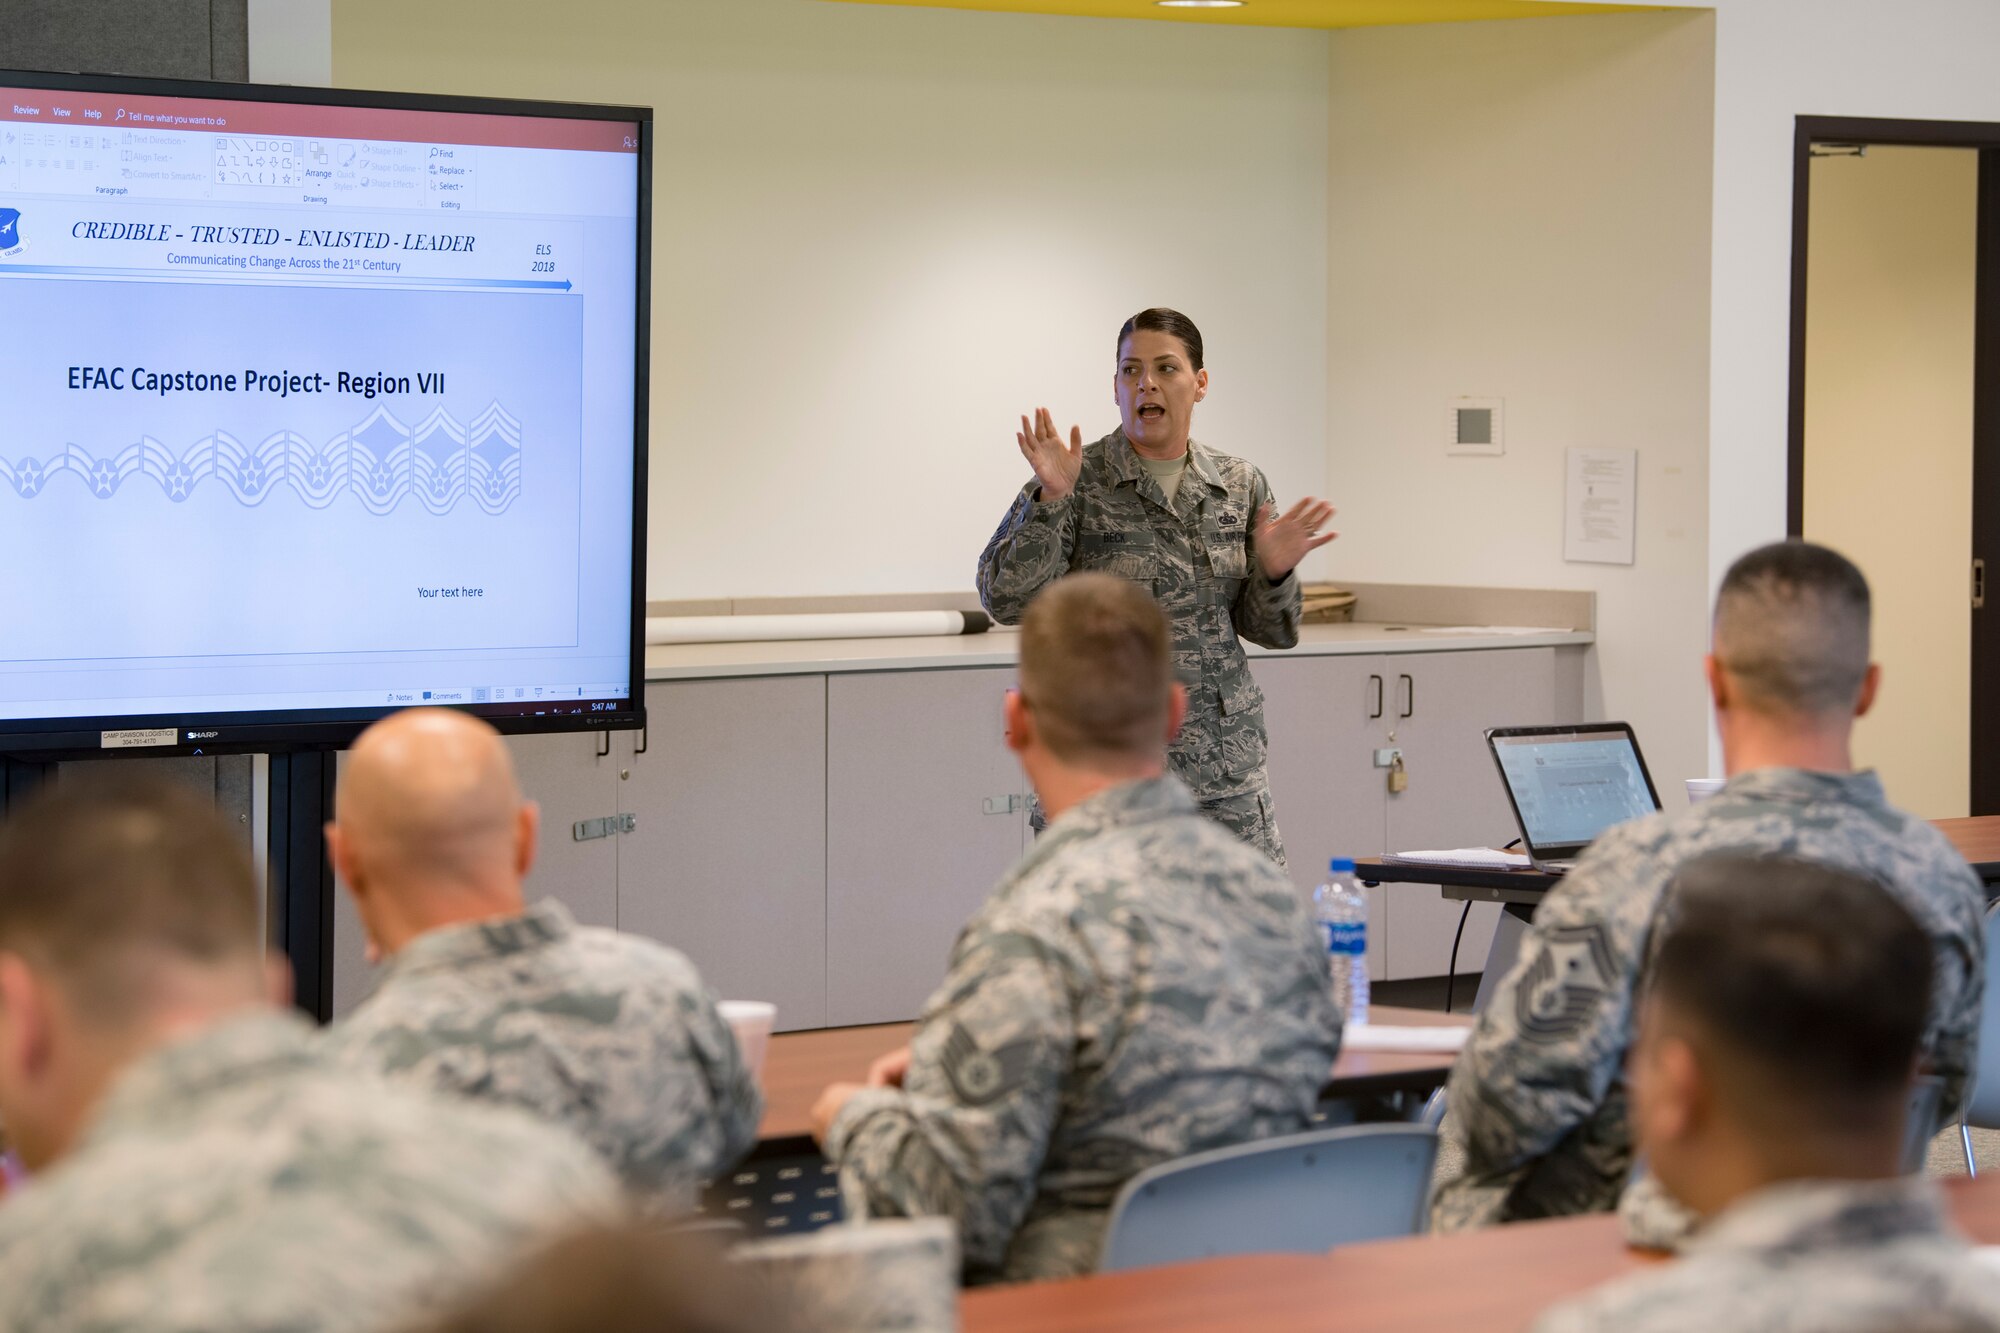 Airmen discuss a broad array of topics and common problems in the Air Force as they prepare a capstone presentation to present to the Enlisted Field Advisory Council (EFAC) August 16, 2018 at the Enlisted Leadership Symposium (ELS), Camp Dawson, W.Va. More than 400 Airmen representing Air National Guard units from each state and territory attended the ELS, a three-day event focused on leadership and professional development. (U.S. Air National Guard Photo by Airman 1st Class Caleb Vance)